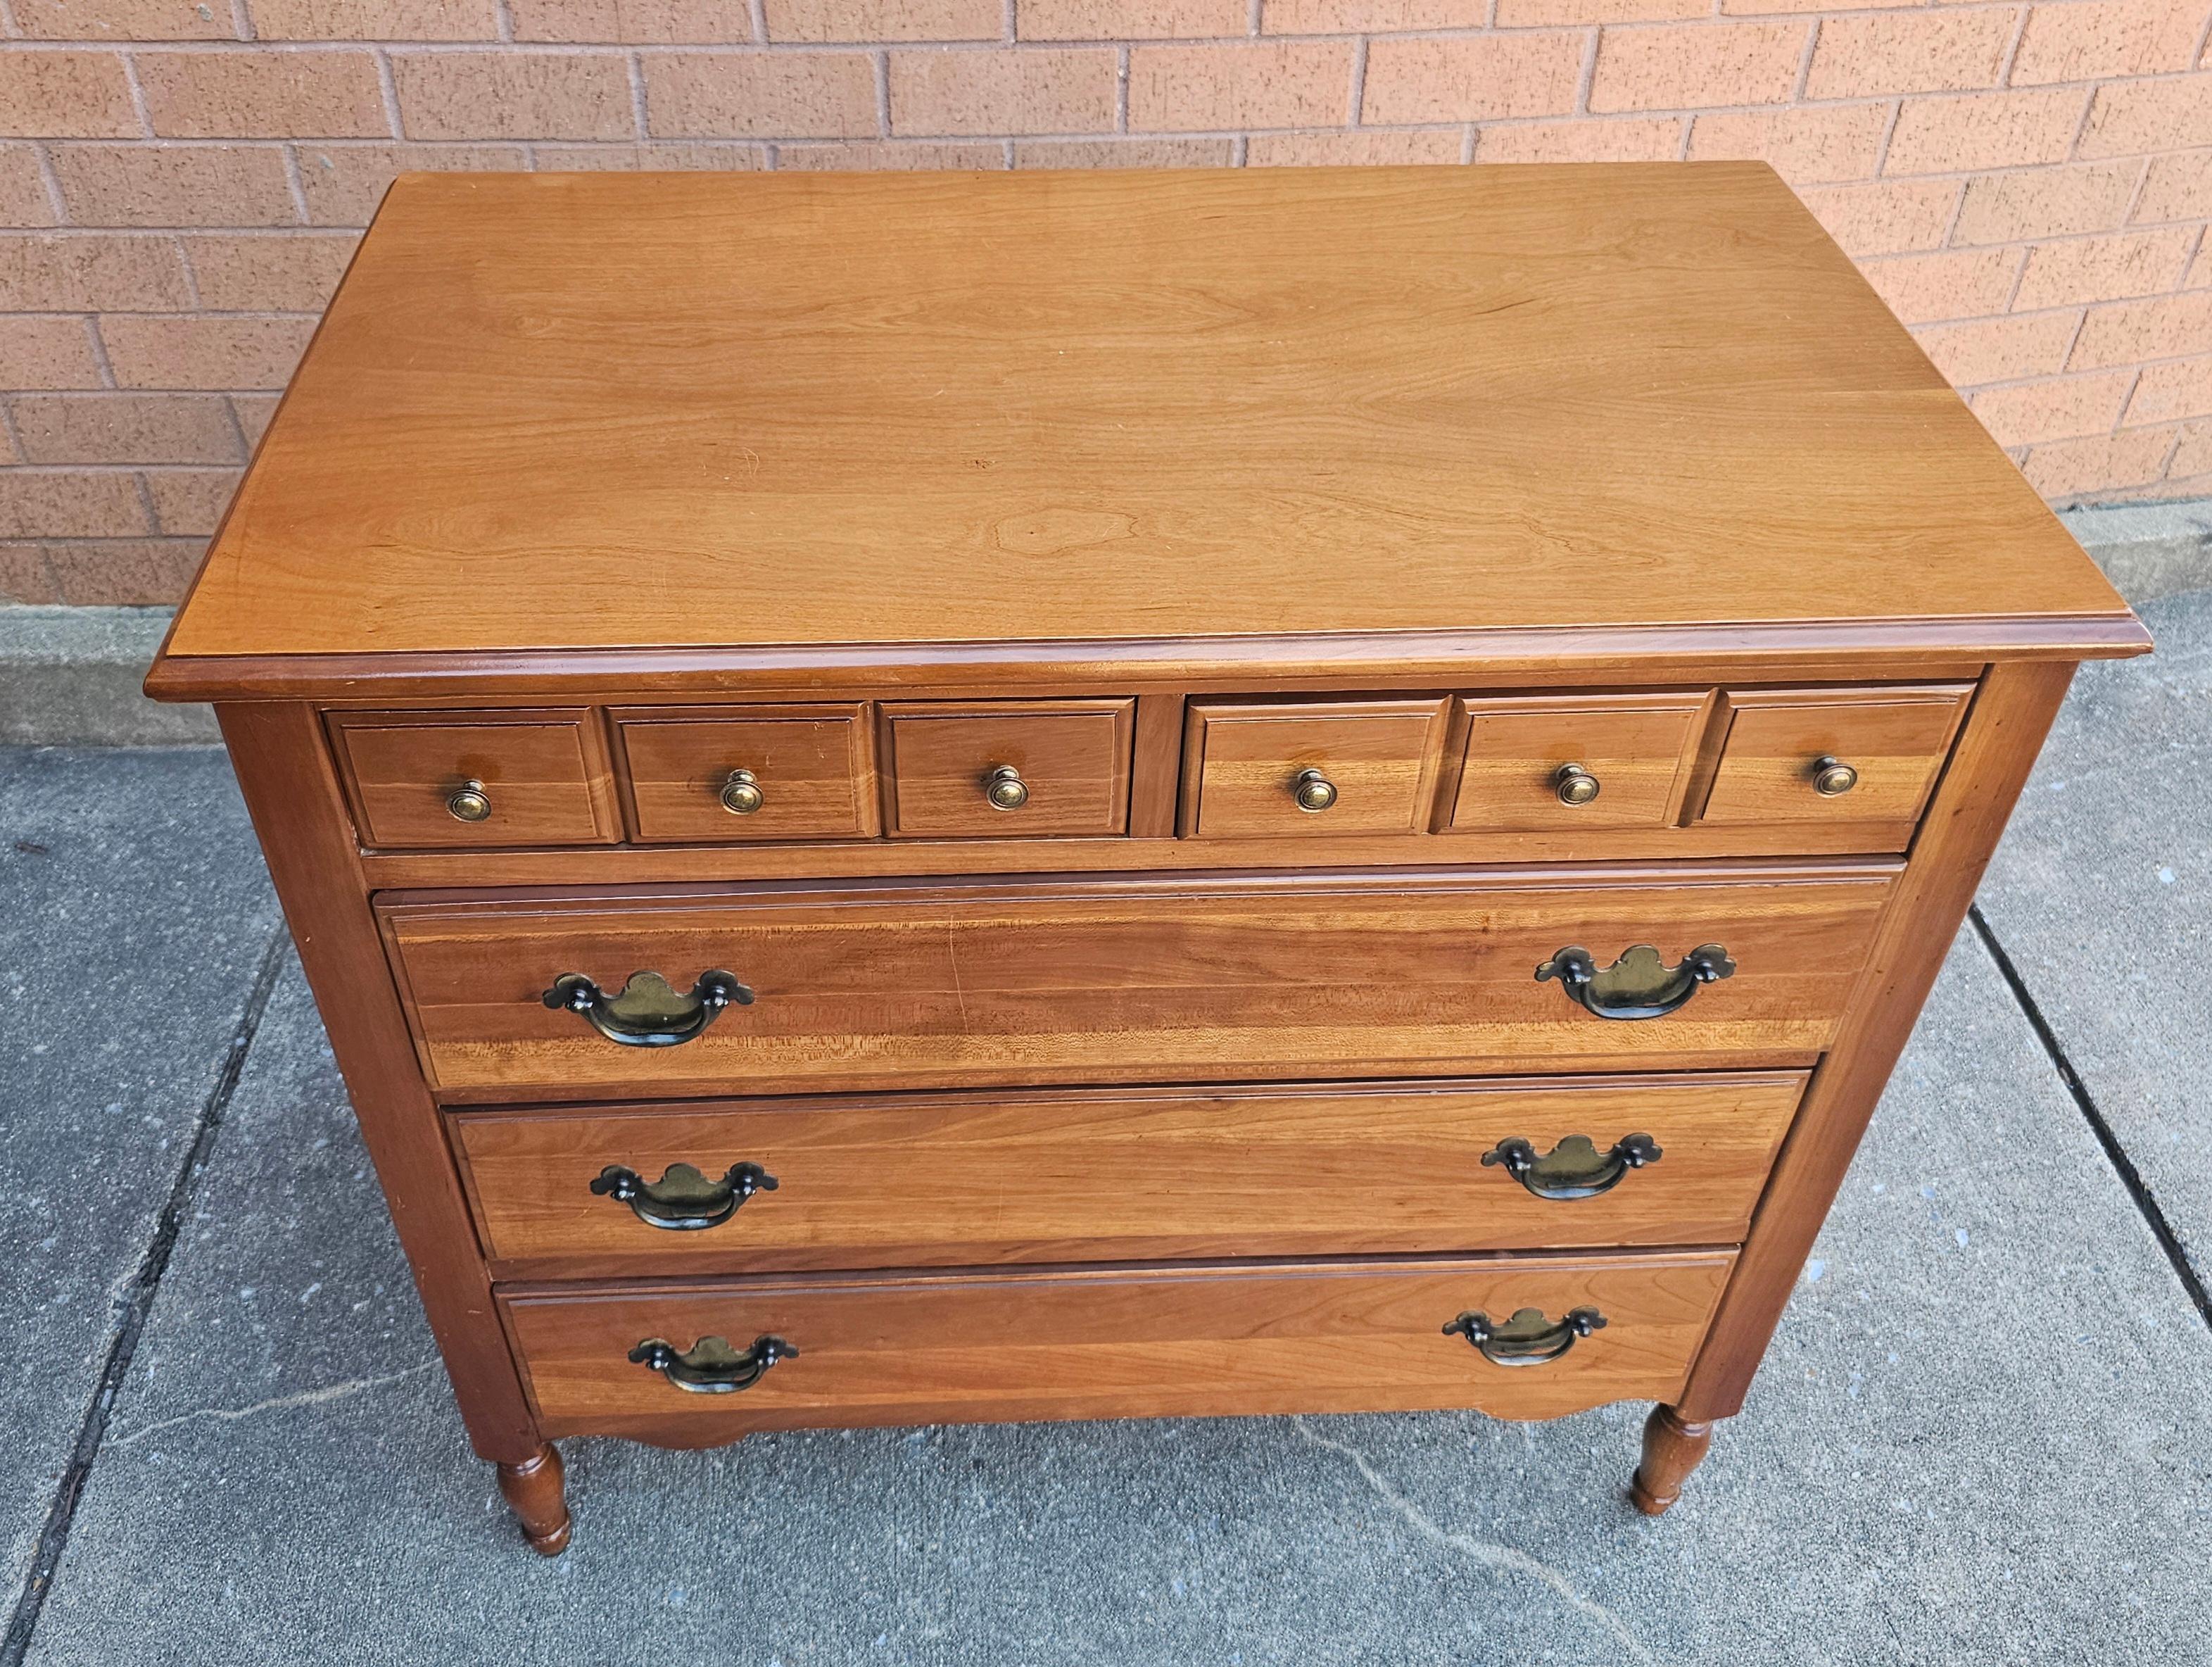 20th Century Mid 20th C. Permacraft Sanford Furniture Five-Drawer Bachelor Chest of Drawers For Sale